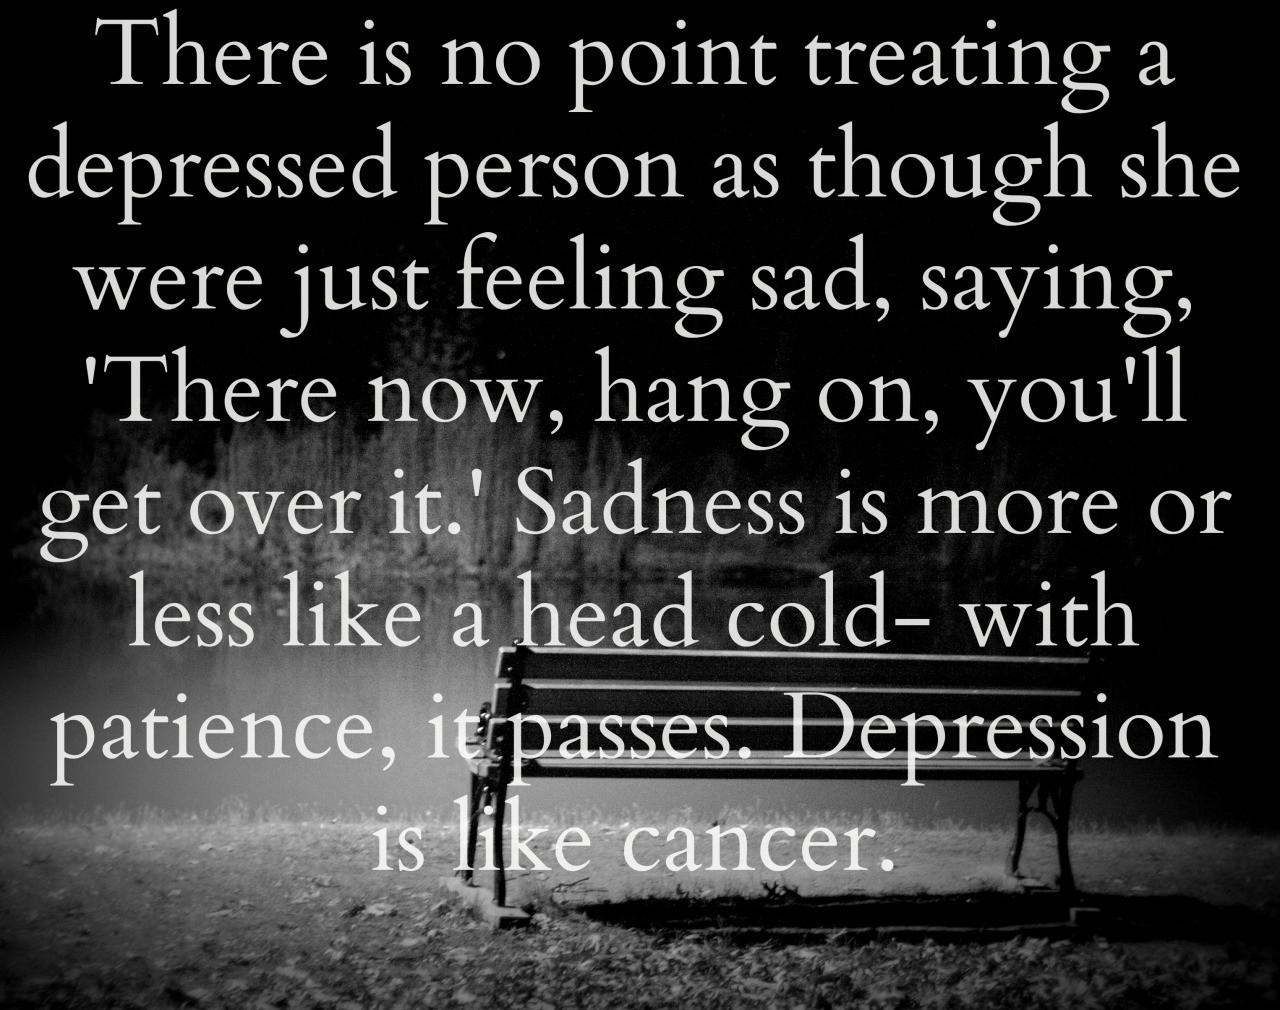 Depressed Quotes About Life
 Life As a Teen depression quotes